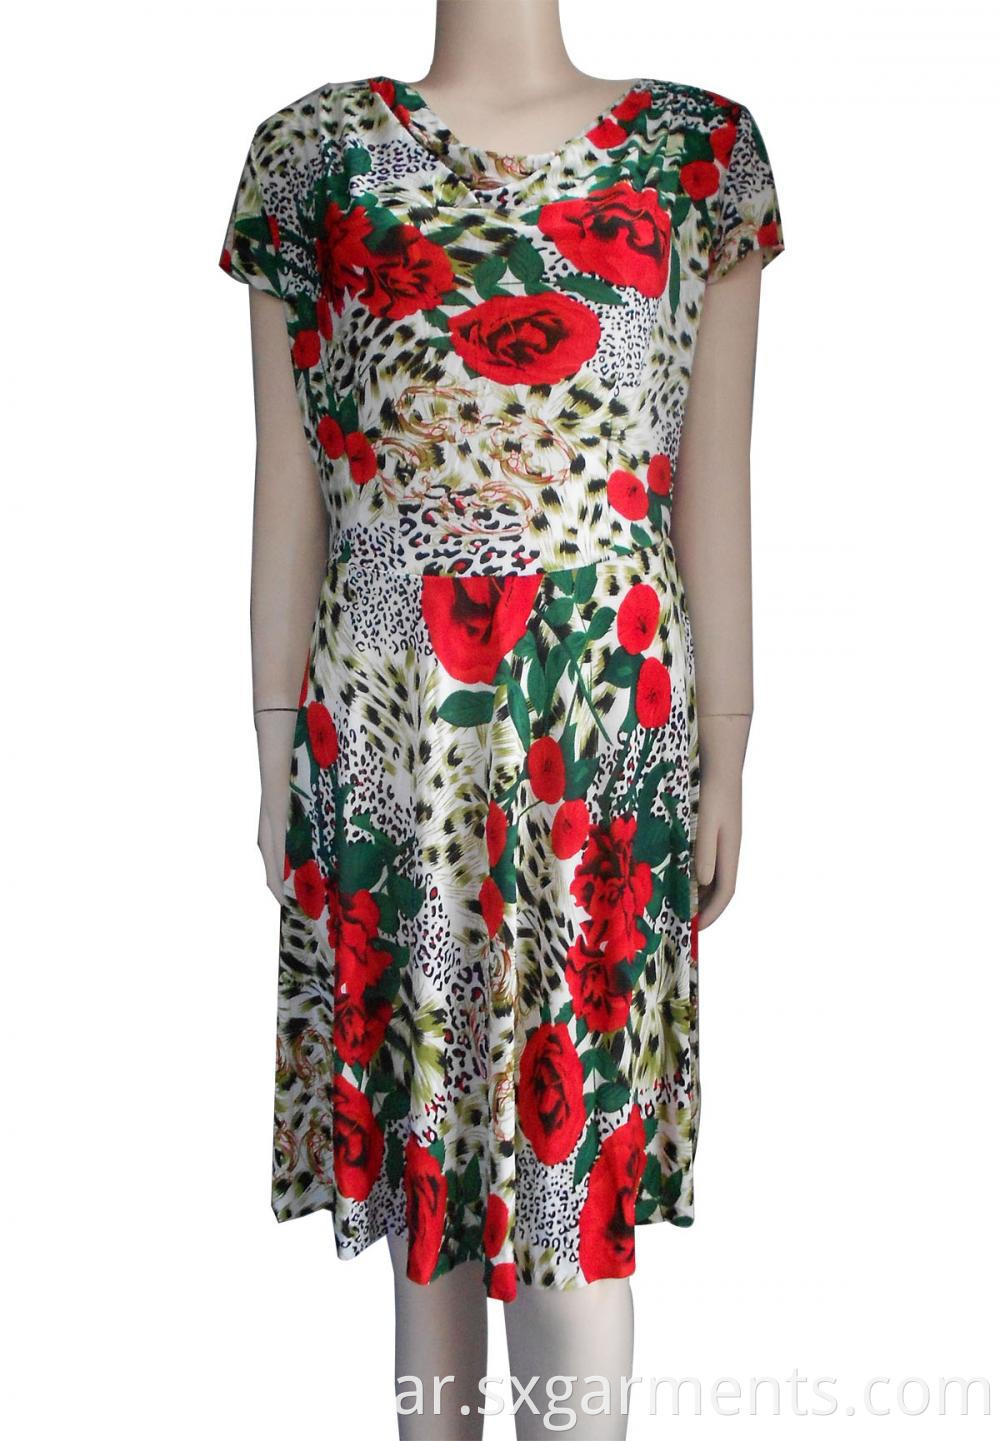 Lady's 85% polyester 15% cotton printed dresses 